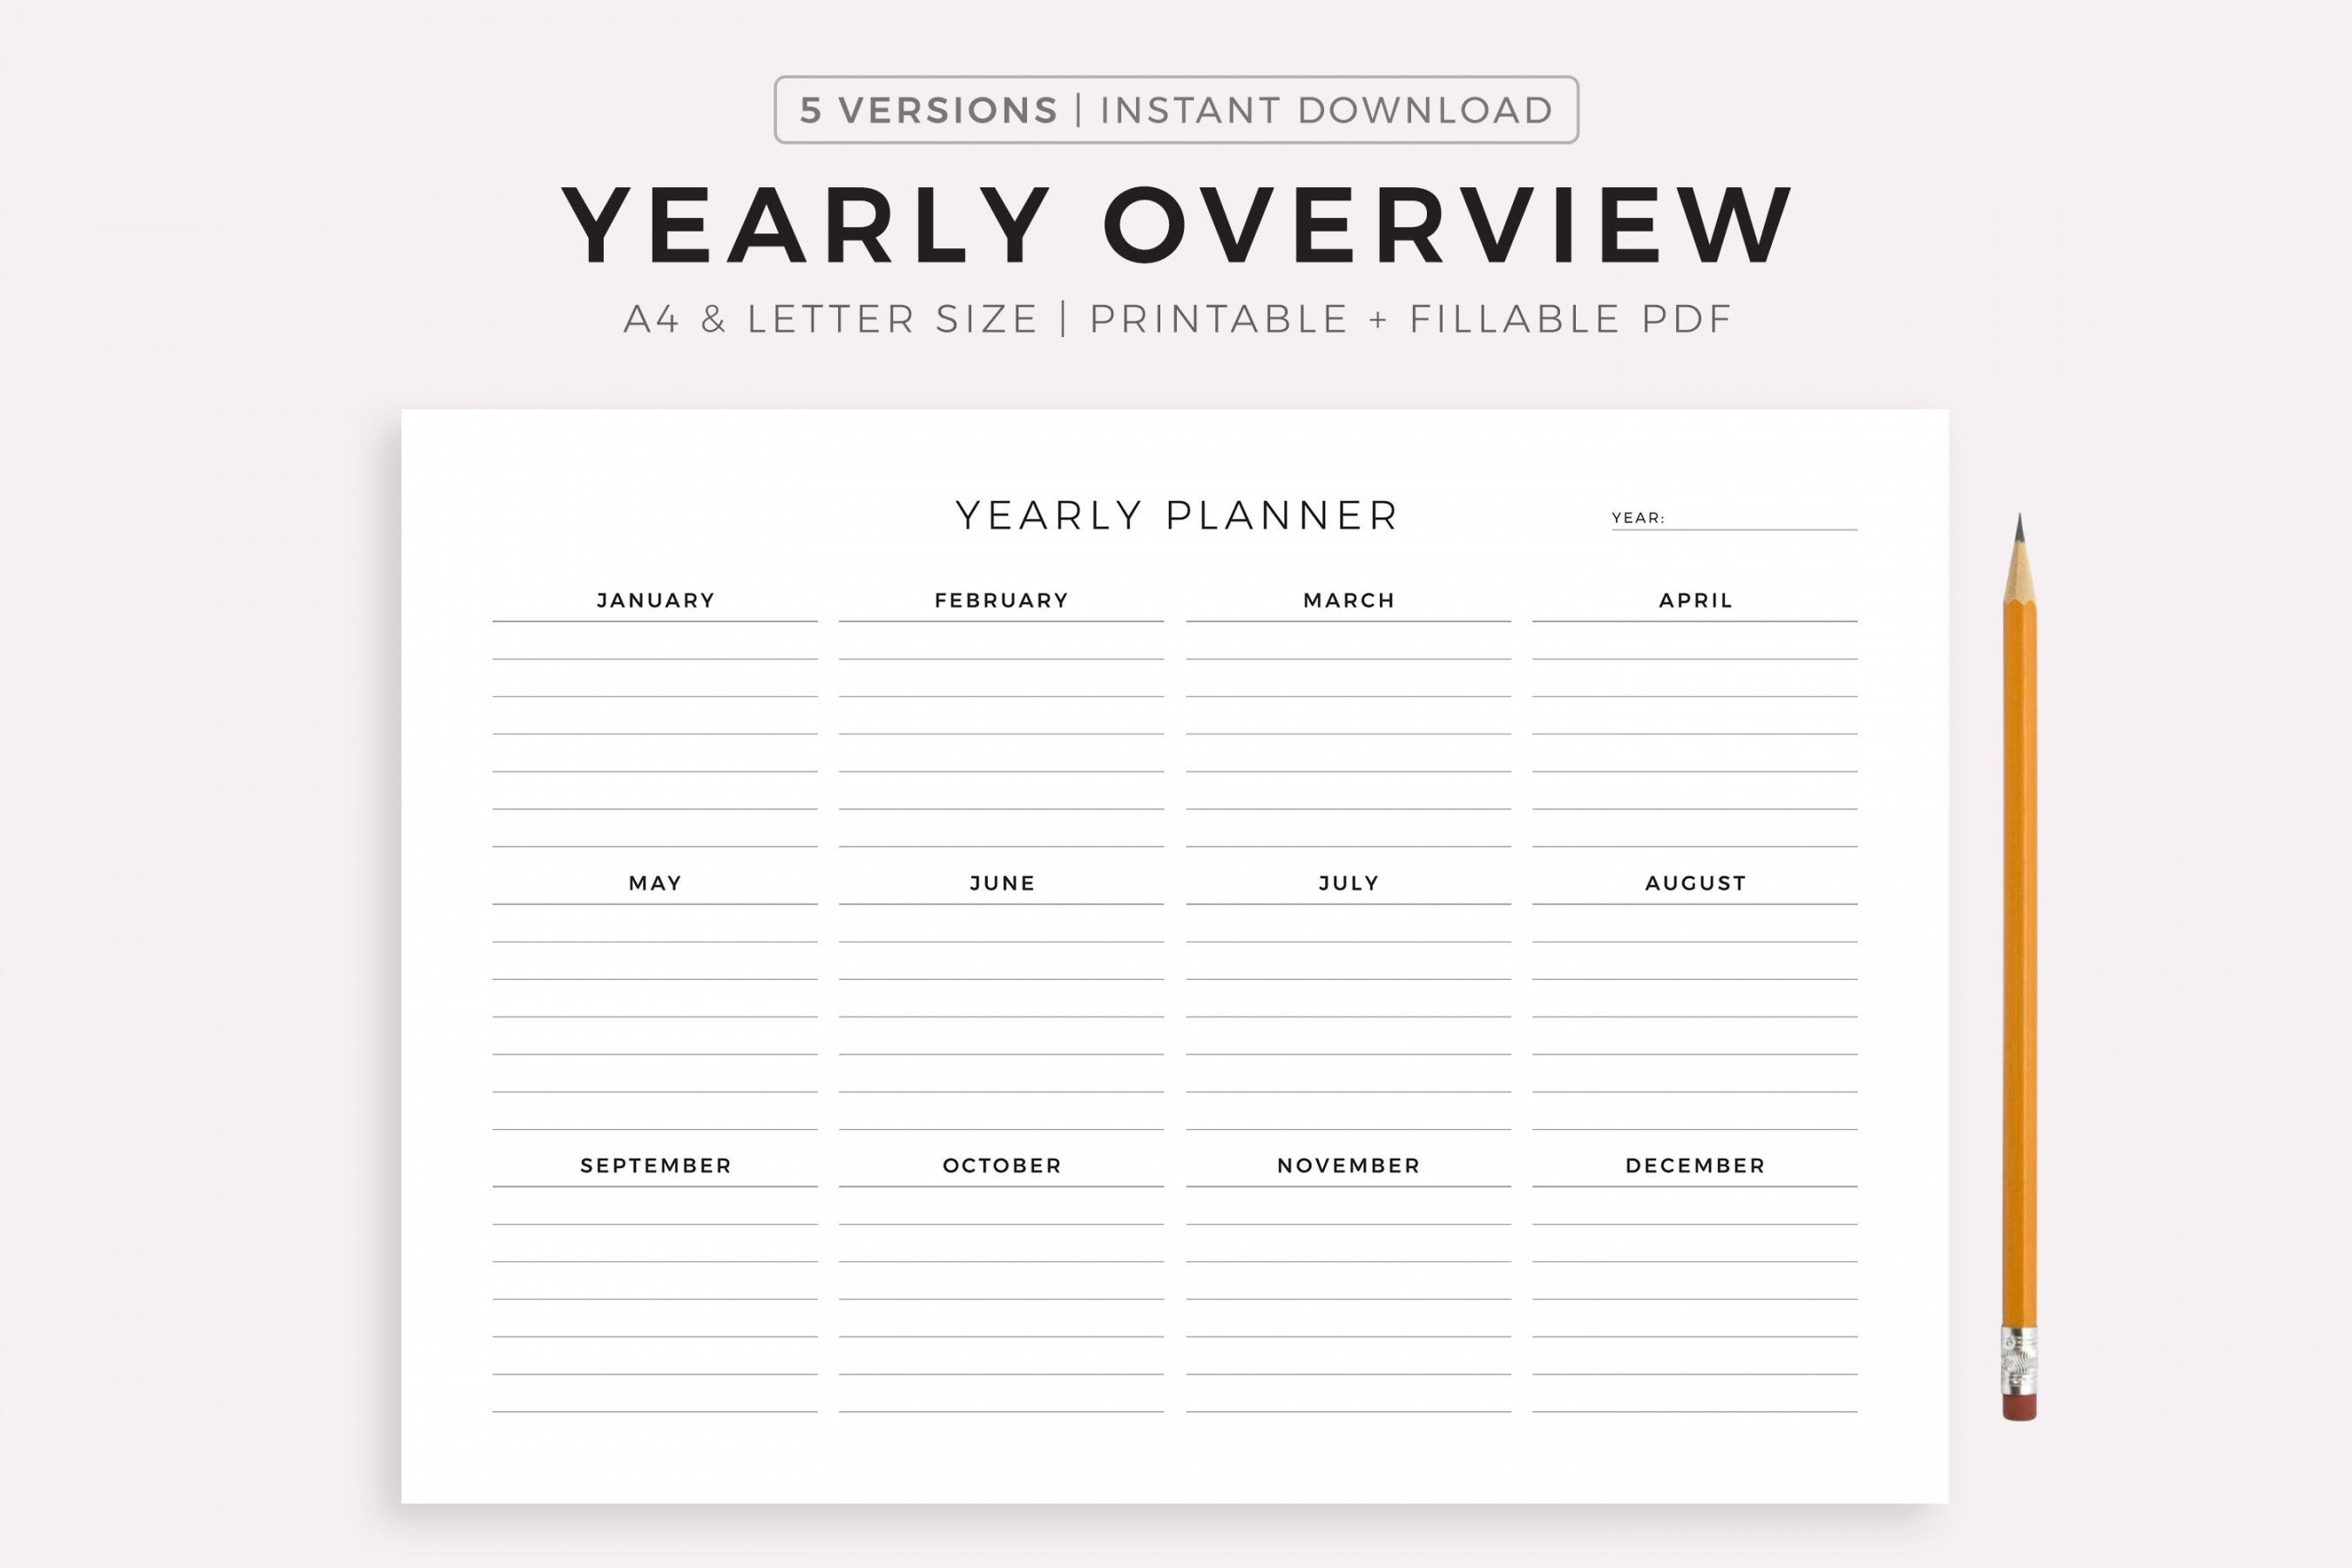 Yearly Overview, Year At a Glance, Annual Planner, Printable